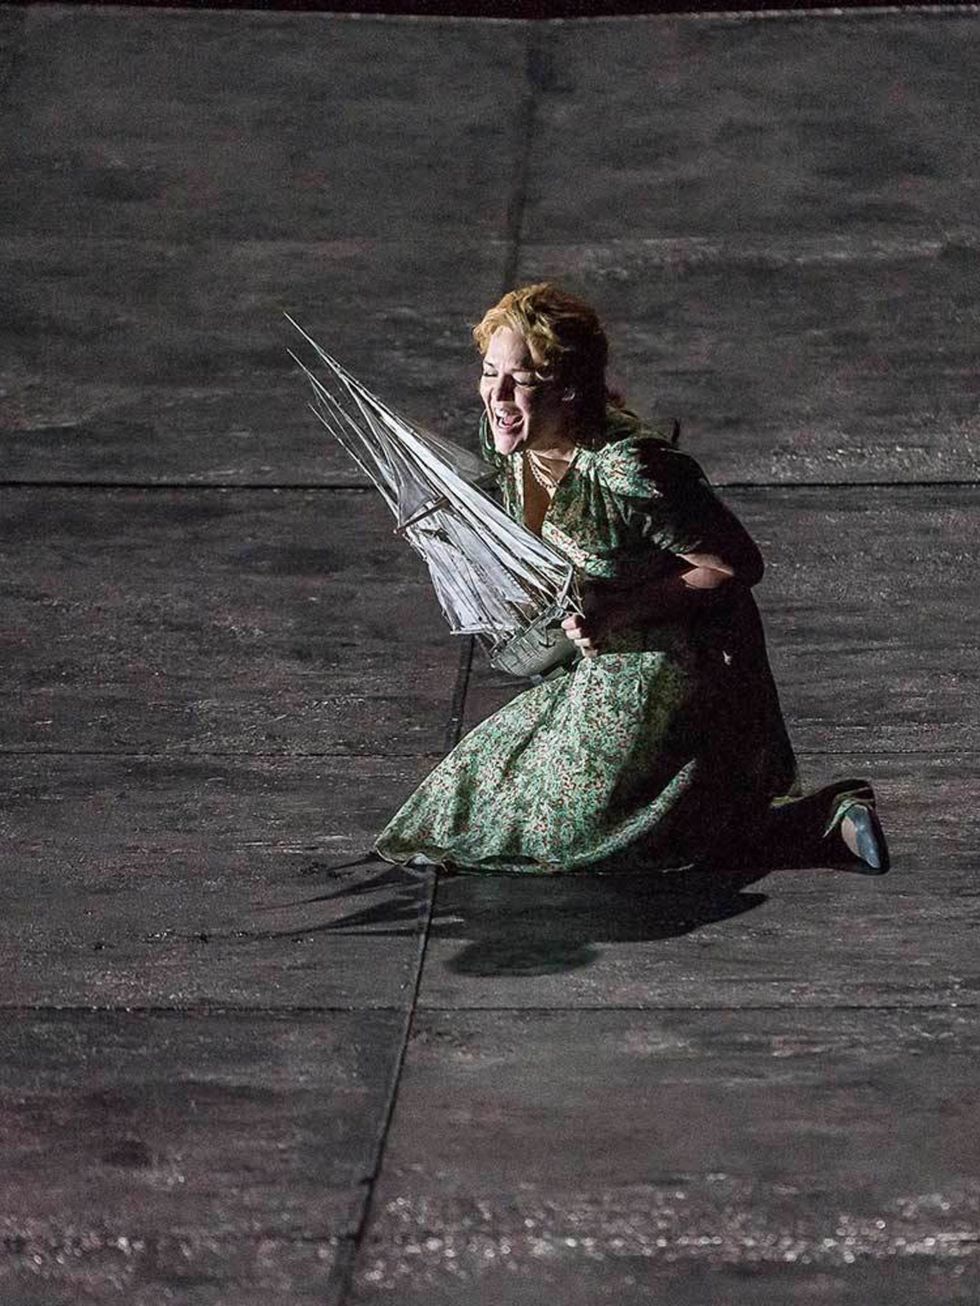 <p><strong>THEATRE: Der fliegende Holländer </strong></p>

<p>The Royal Opera House continues its winter season with Tim Alberys sinister spin on Wagners early opera, Der Fliegende Holländer otherwise known as The Flying Dutchman. Impressive and hauntin